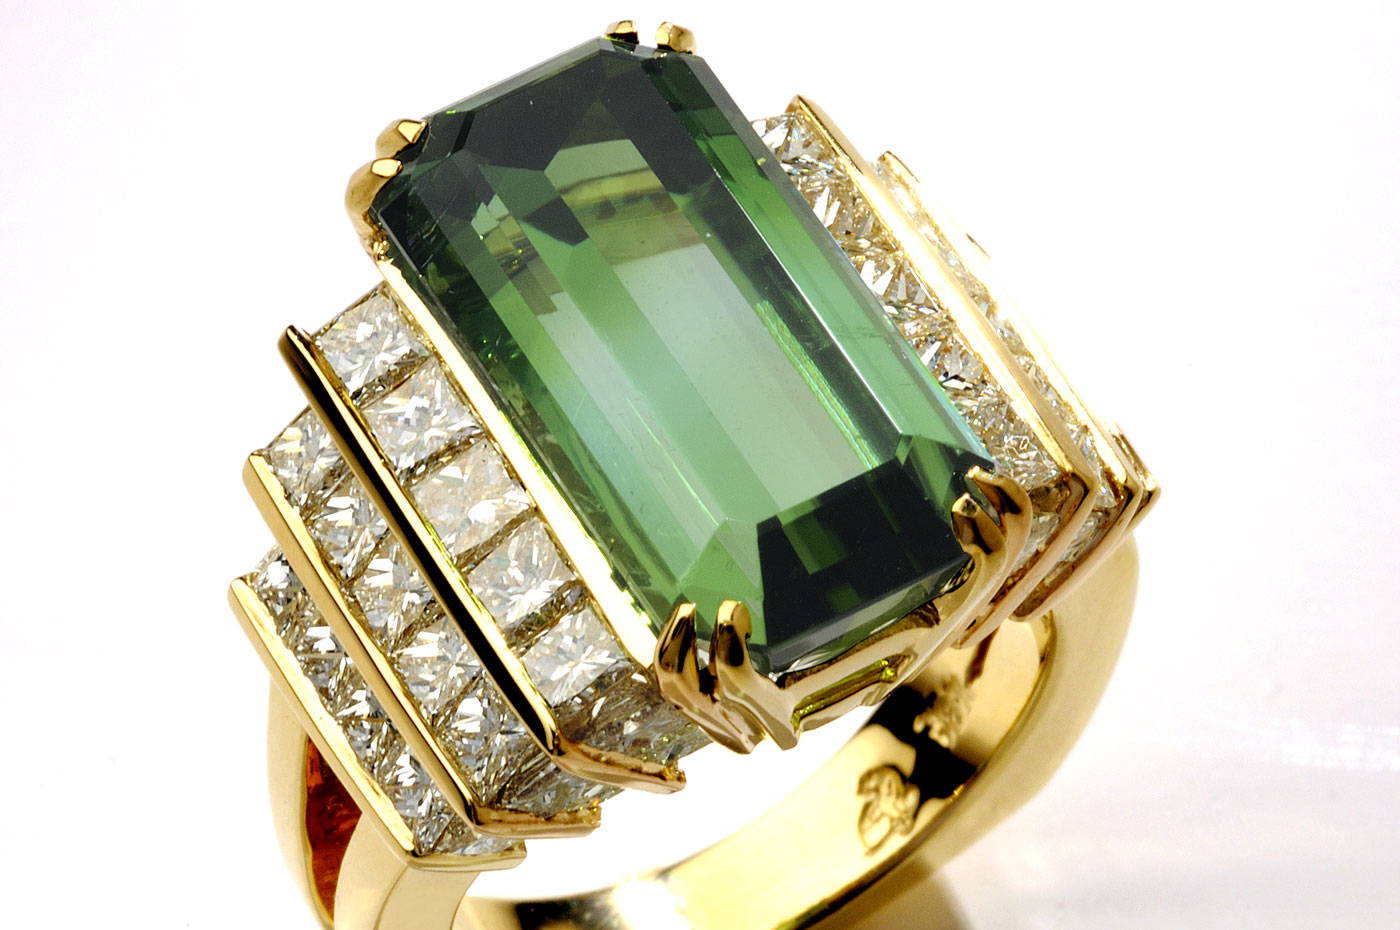 Image of Echelon Emerald Ring in the Grainger Hall of Gems at the Field Museum in Chicago